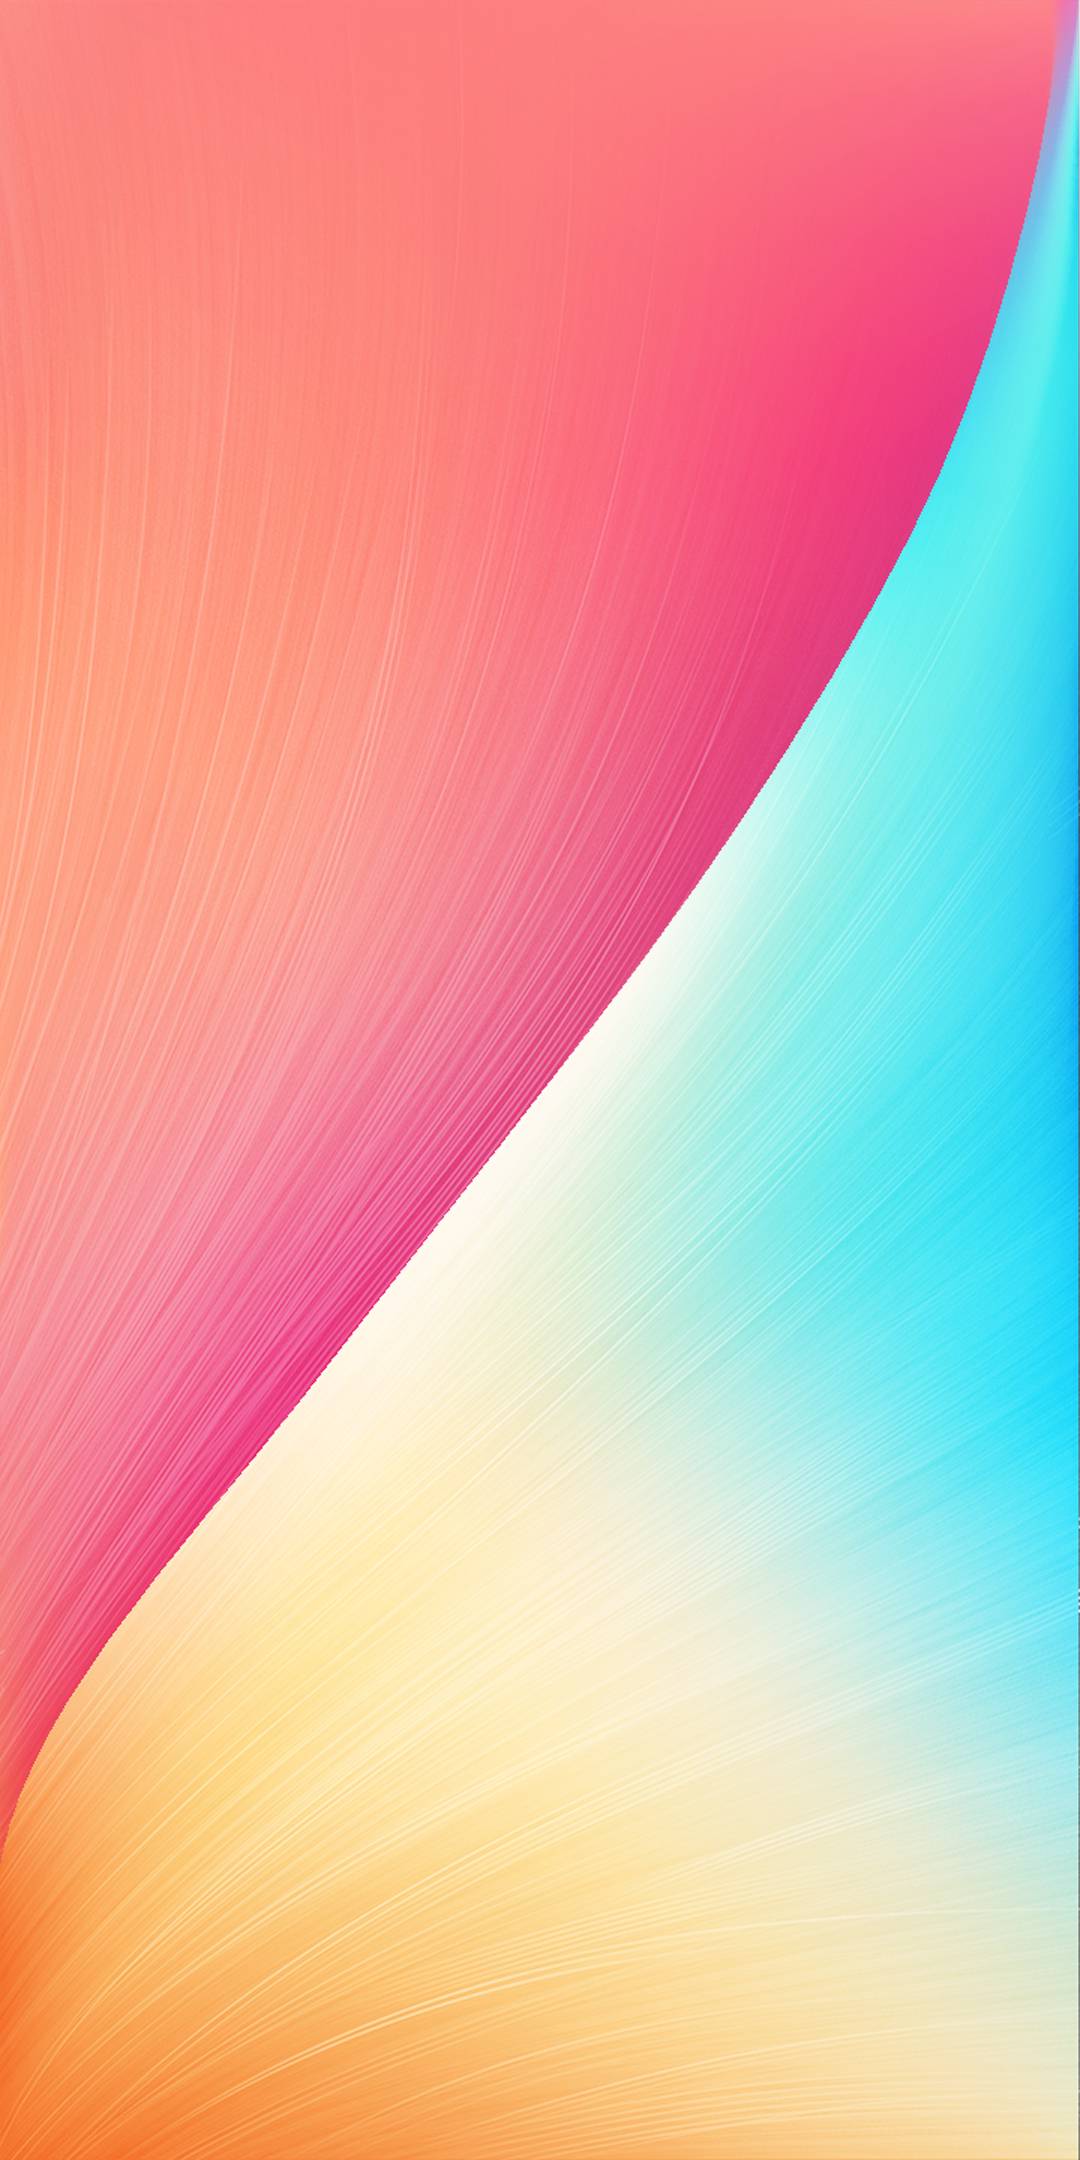 Tecno Camon X Stock Wallpaper 007 1080x2160 Xiaomi Wallpapers Abstract Wallpaper Backgrounds Abstract Iphone Wallpaper